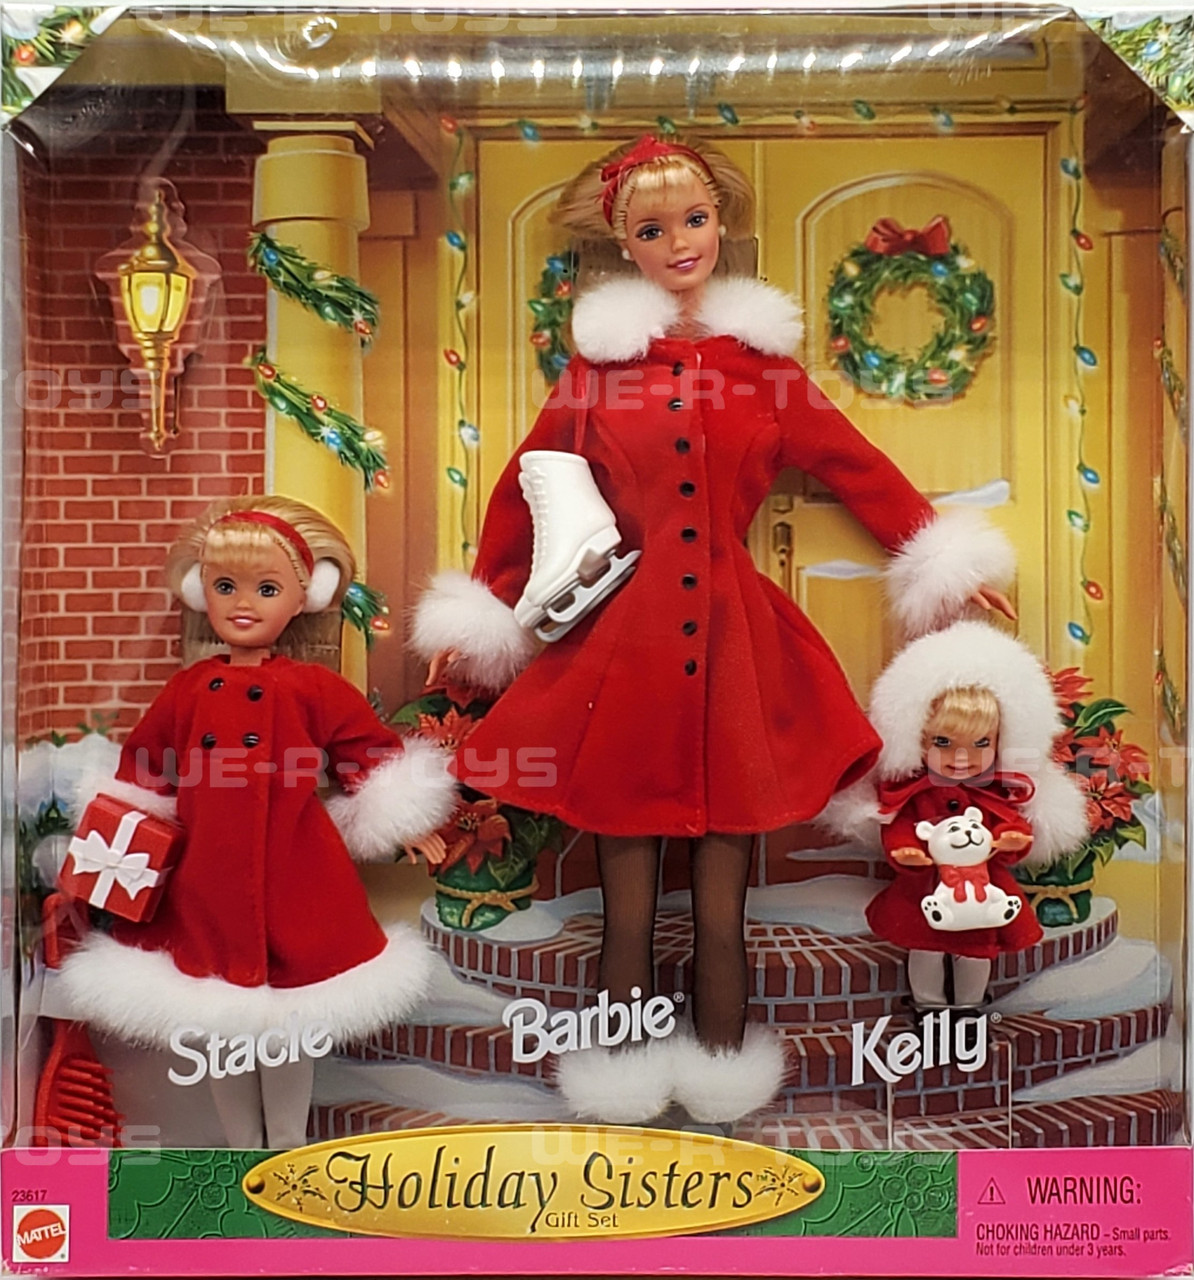 Barbie Holiday Sisters Gift Set Barbie Kelly and Stacie Dolls 1999 Mattel  23617